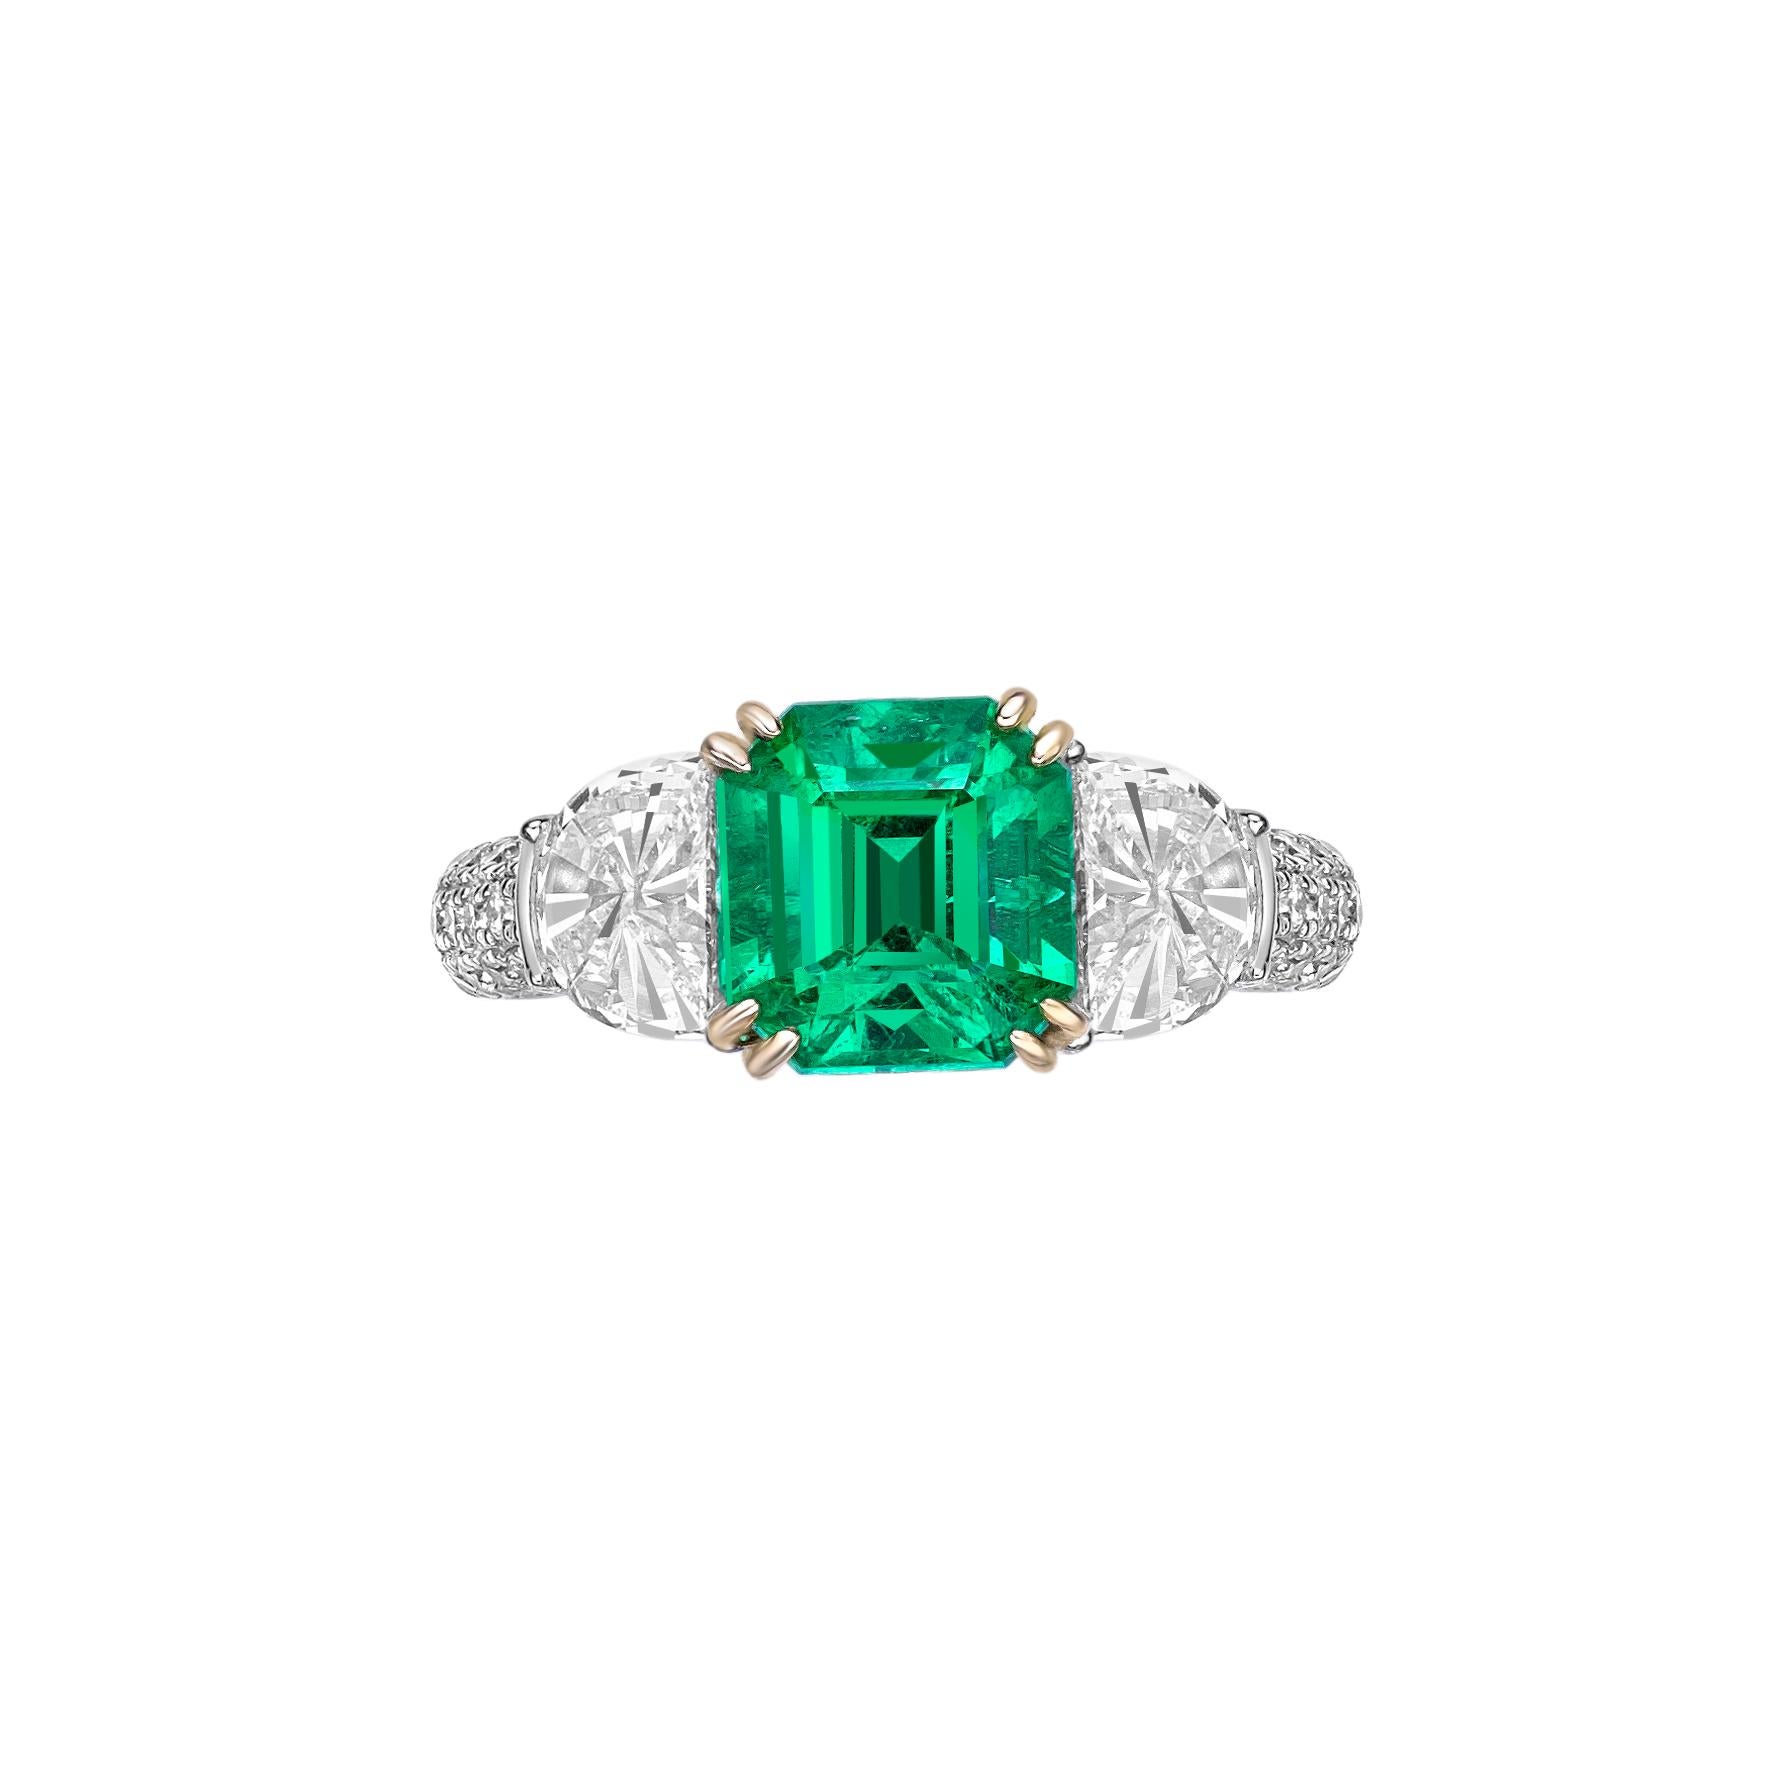 Contemporary 2.62 Carat Emerald Fancy Ring in 18Karat White Yellow Gold with White Diamond. For Sale